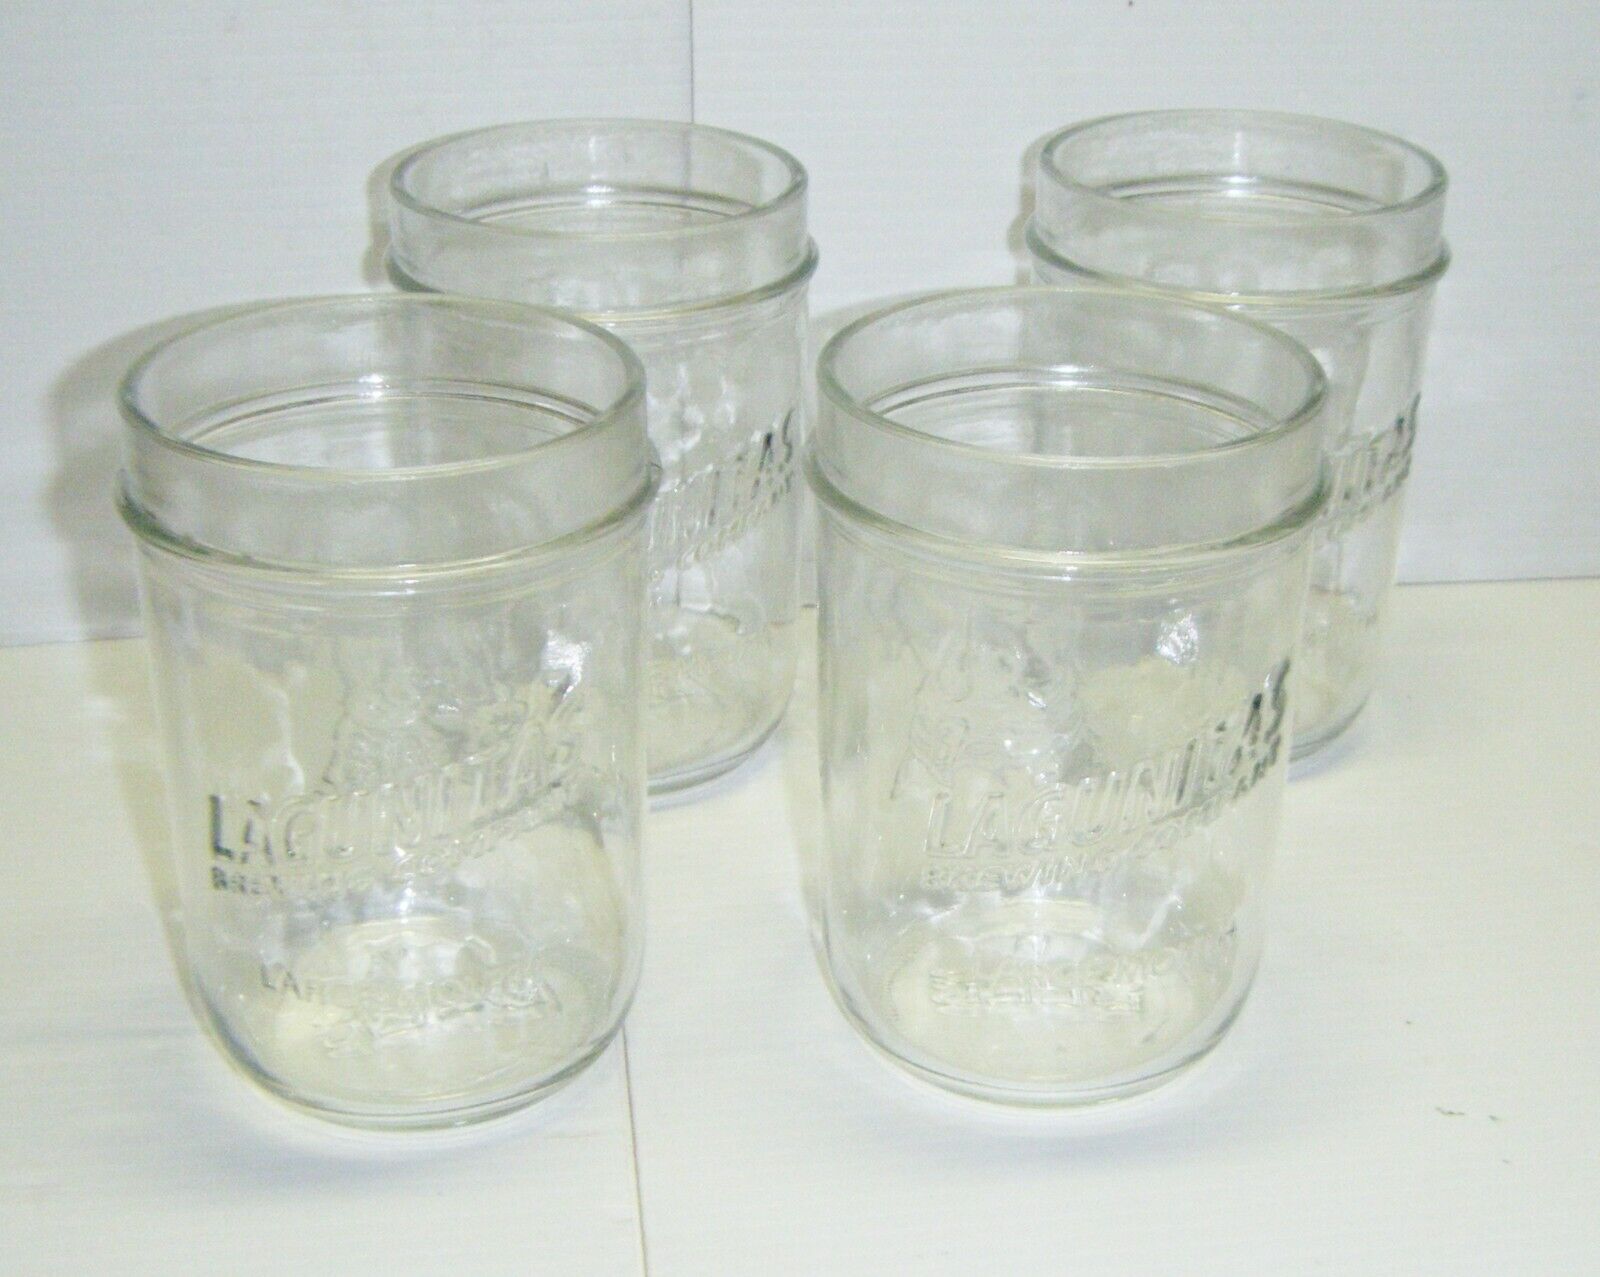 4 New Old Stock 20 oz. Lagunitas Wide Mouth Embossed Beer Glasses